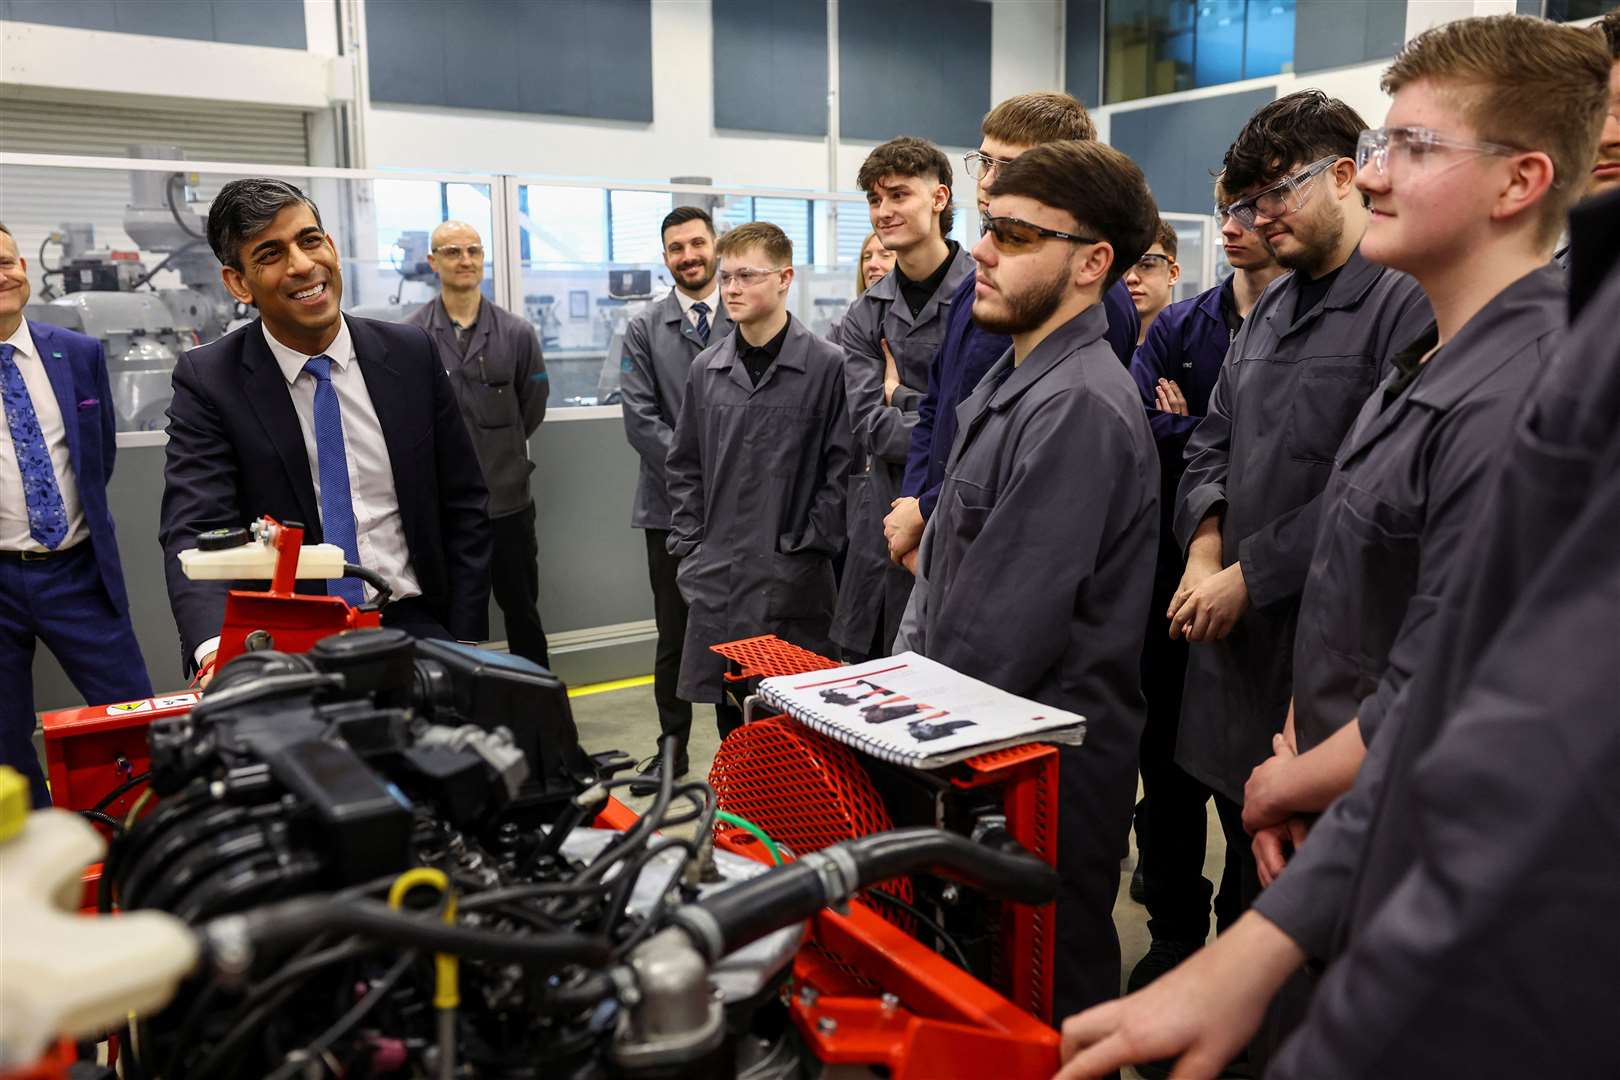 Prime Minster Rishi Sunak visits the Manufacturing Technology Centre in Coventry (Carl Recine/PA)